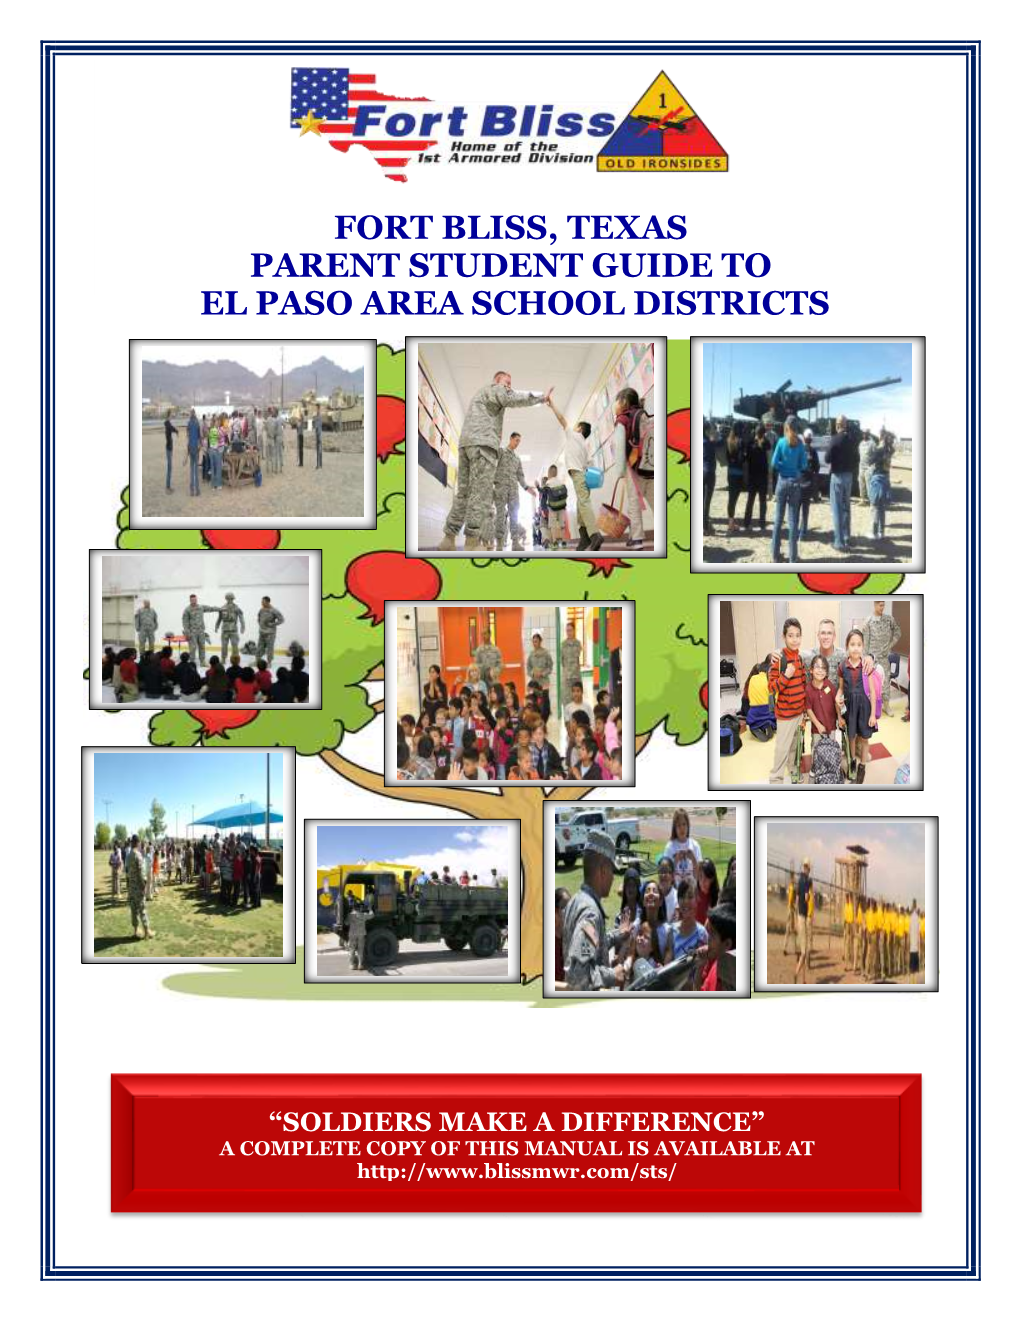 Fort Bliss, Texas Parent Student Guide to El Paso